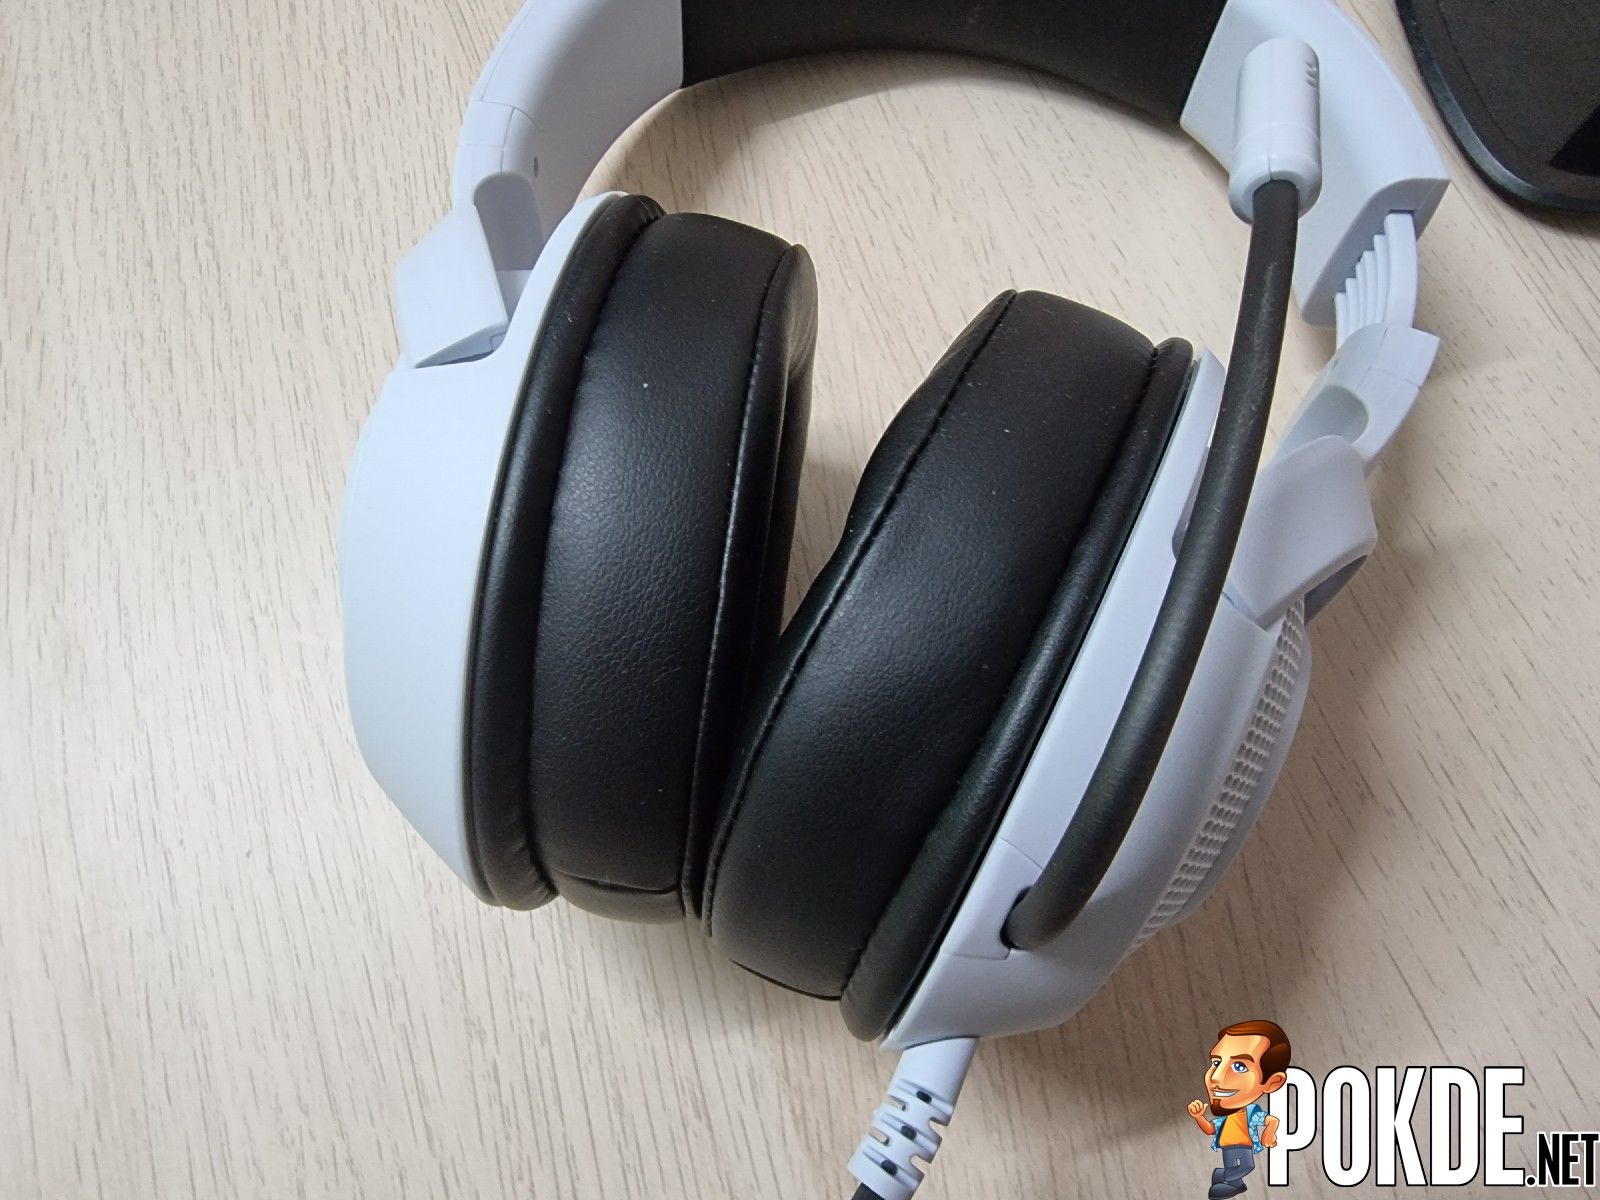 Razer Kraken X Review Affordable And Practical For Console Gaming Pokde Net